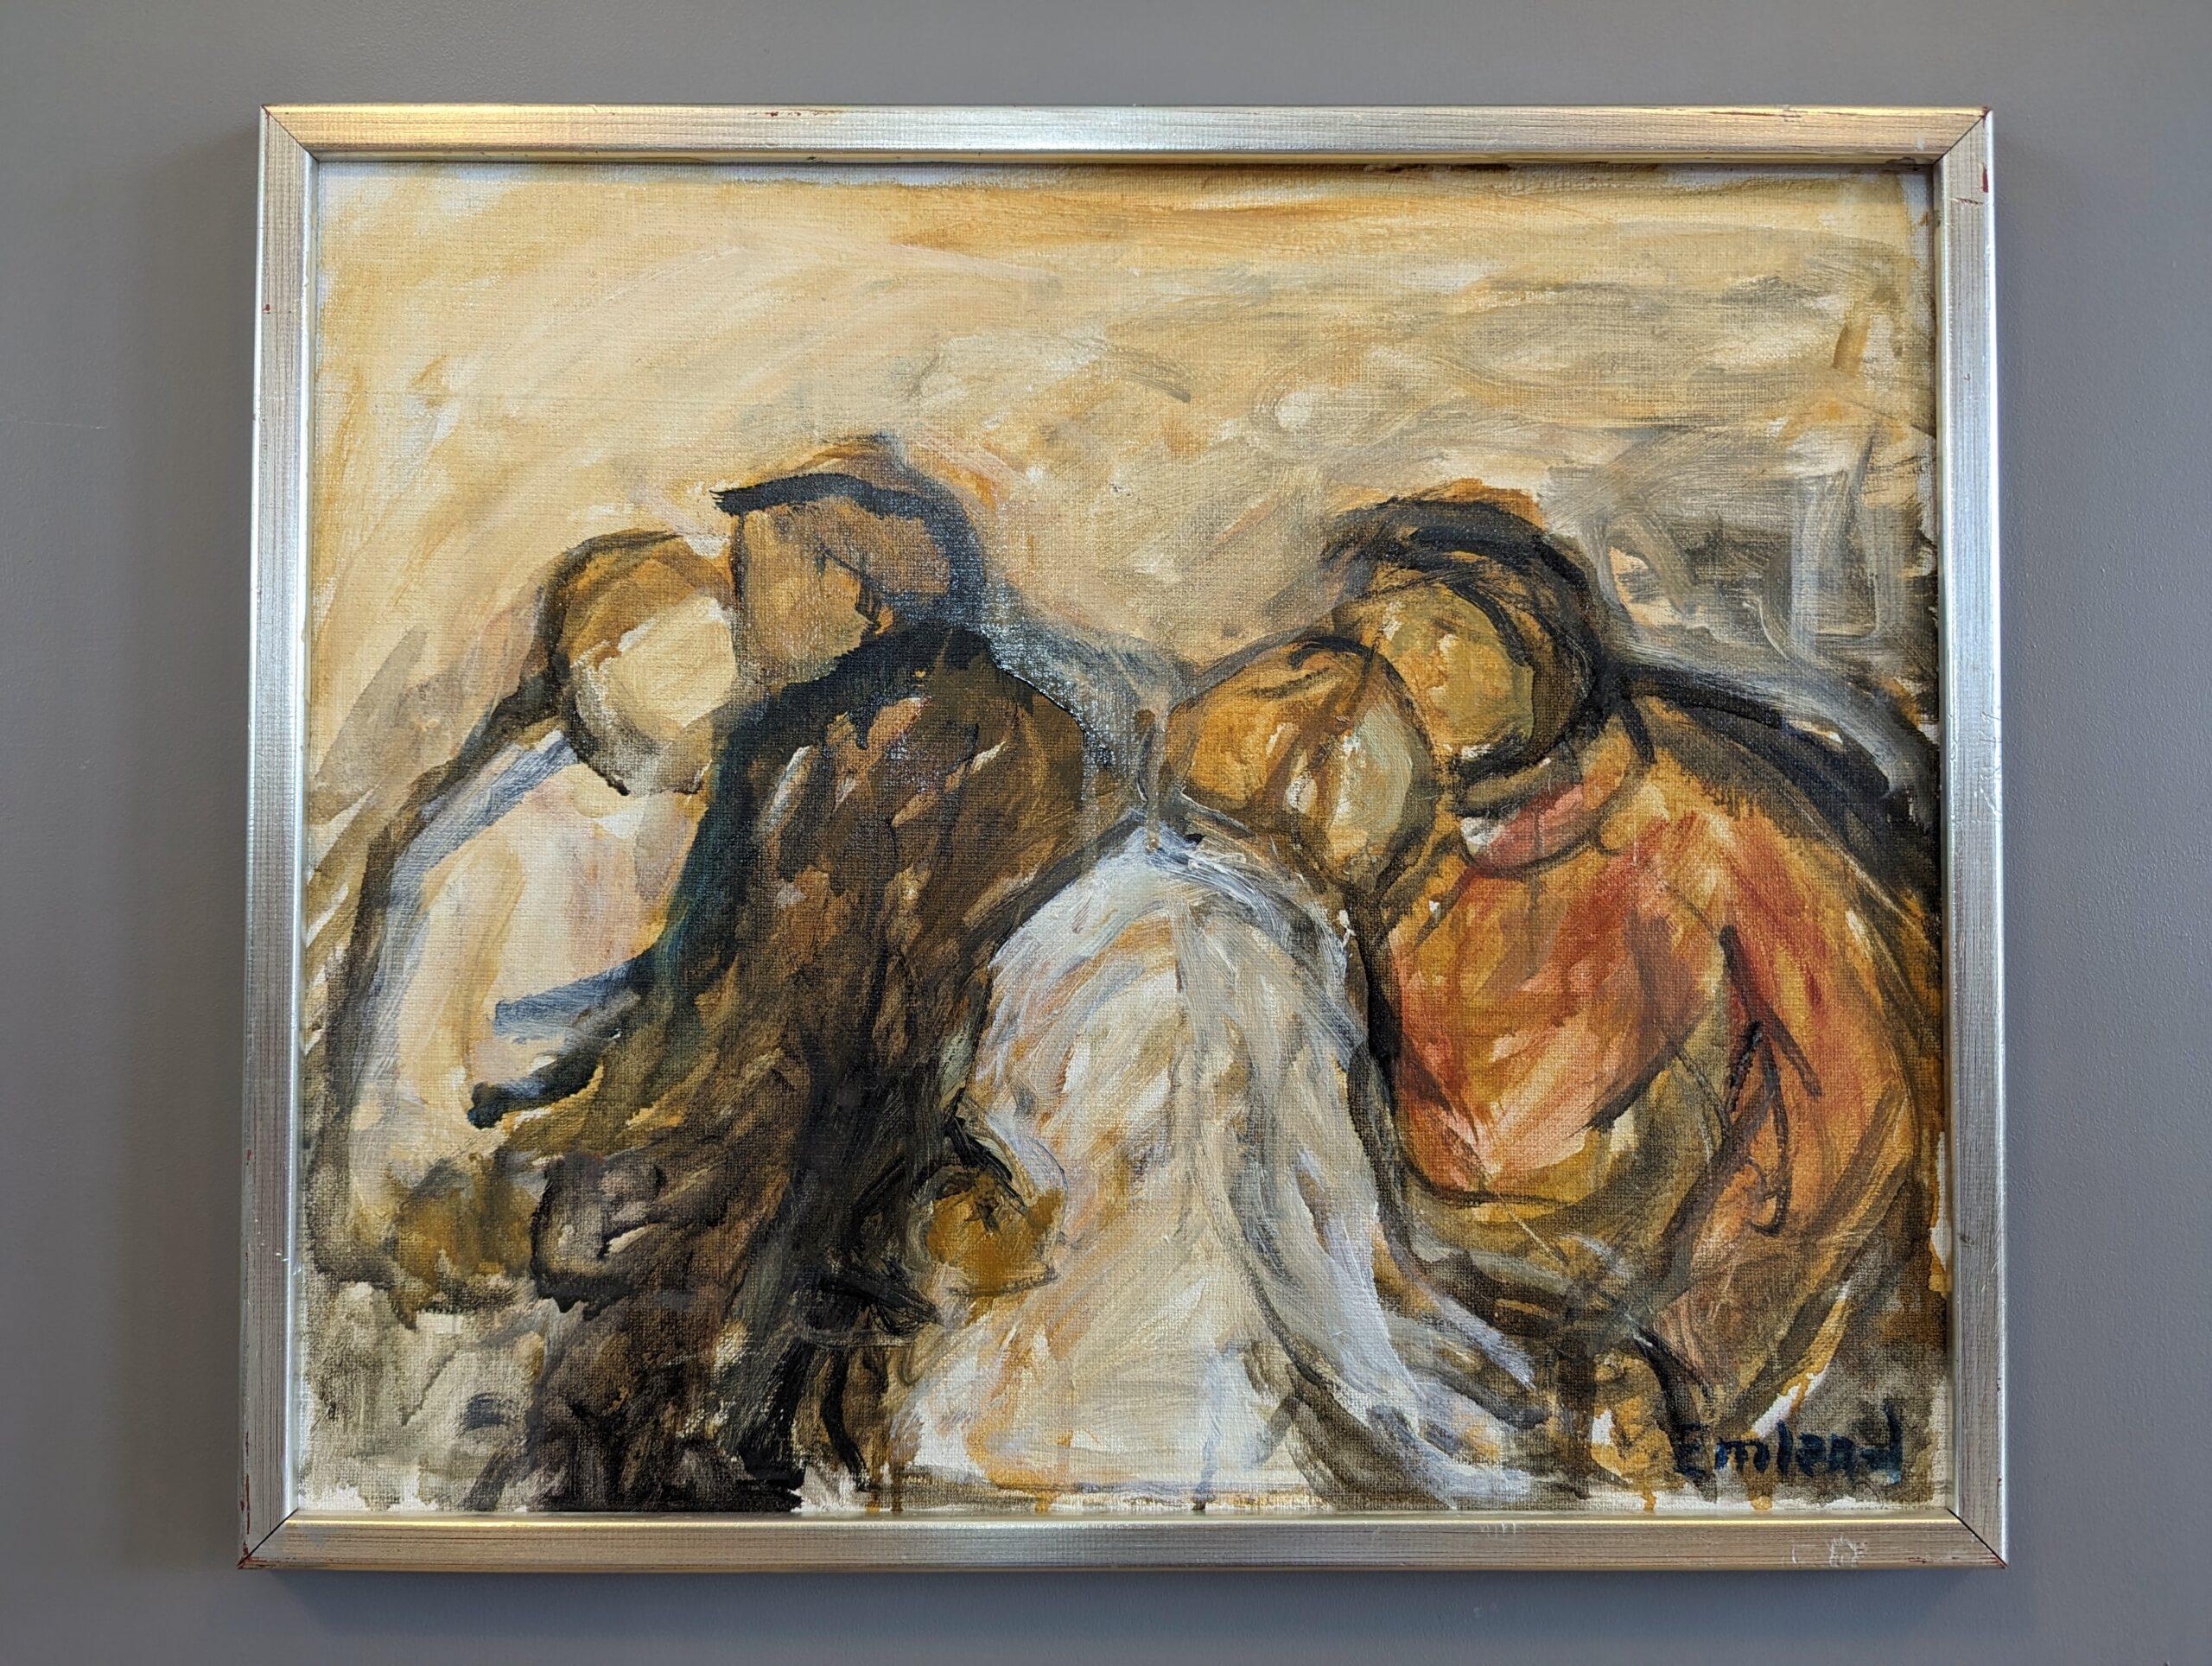 DANCE
Size: 42 x 49.5 cm (including frame)
Oil on Canvas

An endearing mid-century figurative composition, executed in oil onto canvas.

In the painting, two couples engaged in a dance, occupy each side of the canvas.

Executed in an expressive